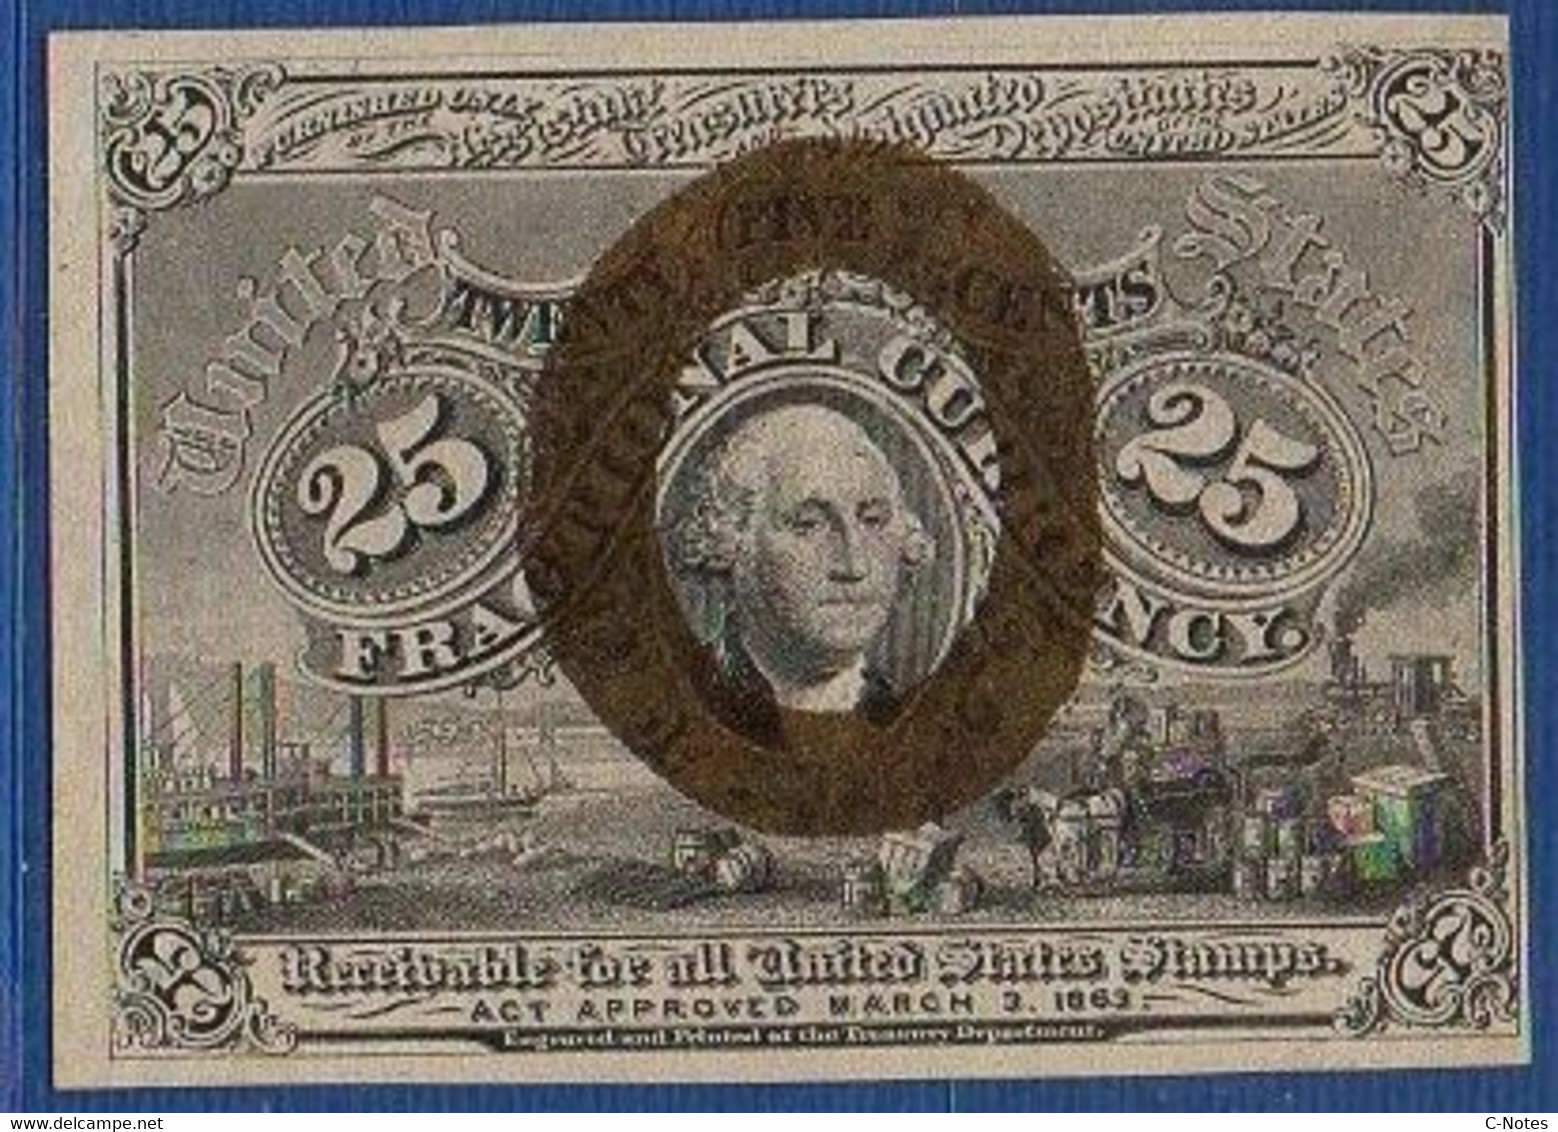 UNITED STATES OF AMERICA - P.103 – 10 Cents 1863 AUNC, No Serial Number - 1863 : 2° Emission